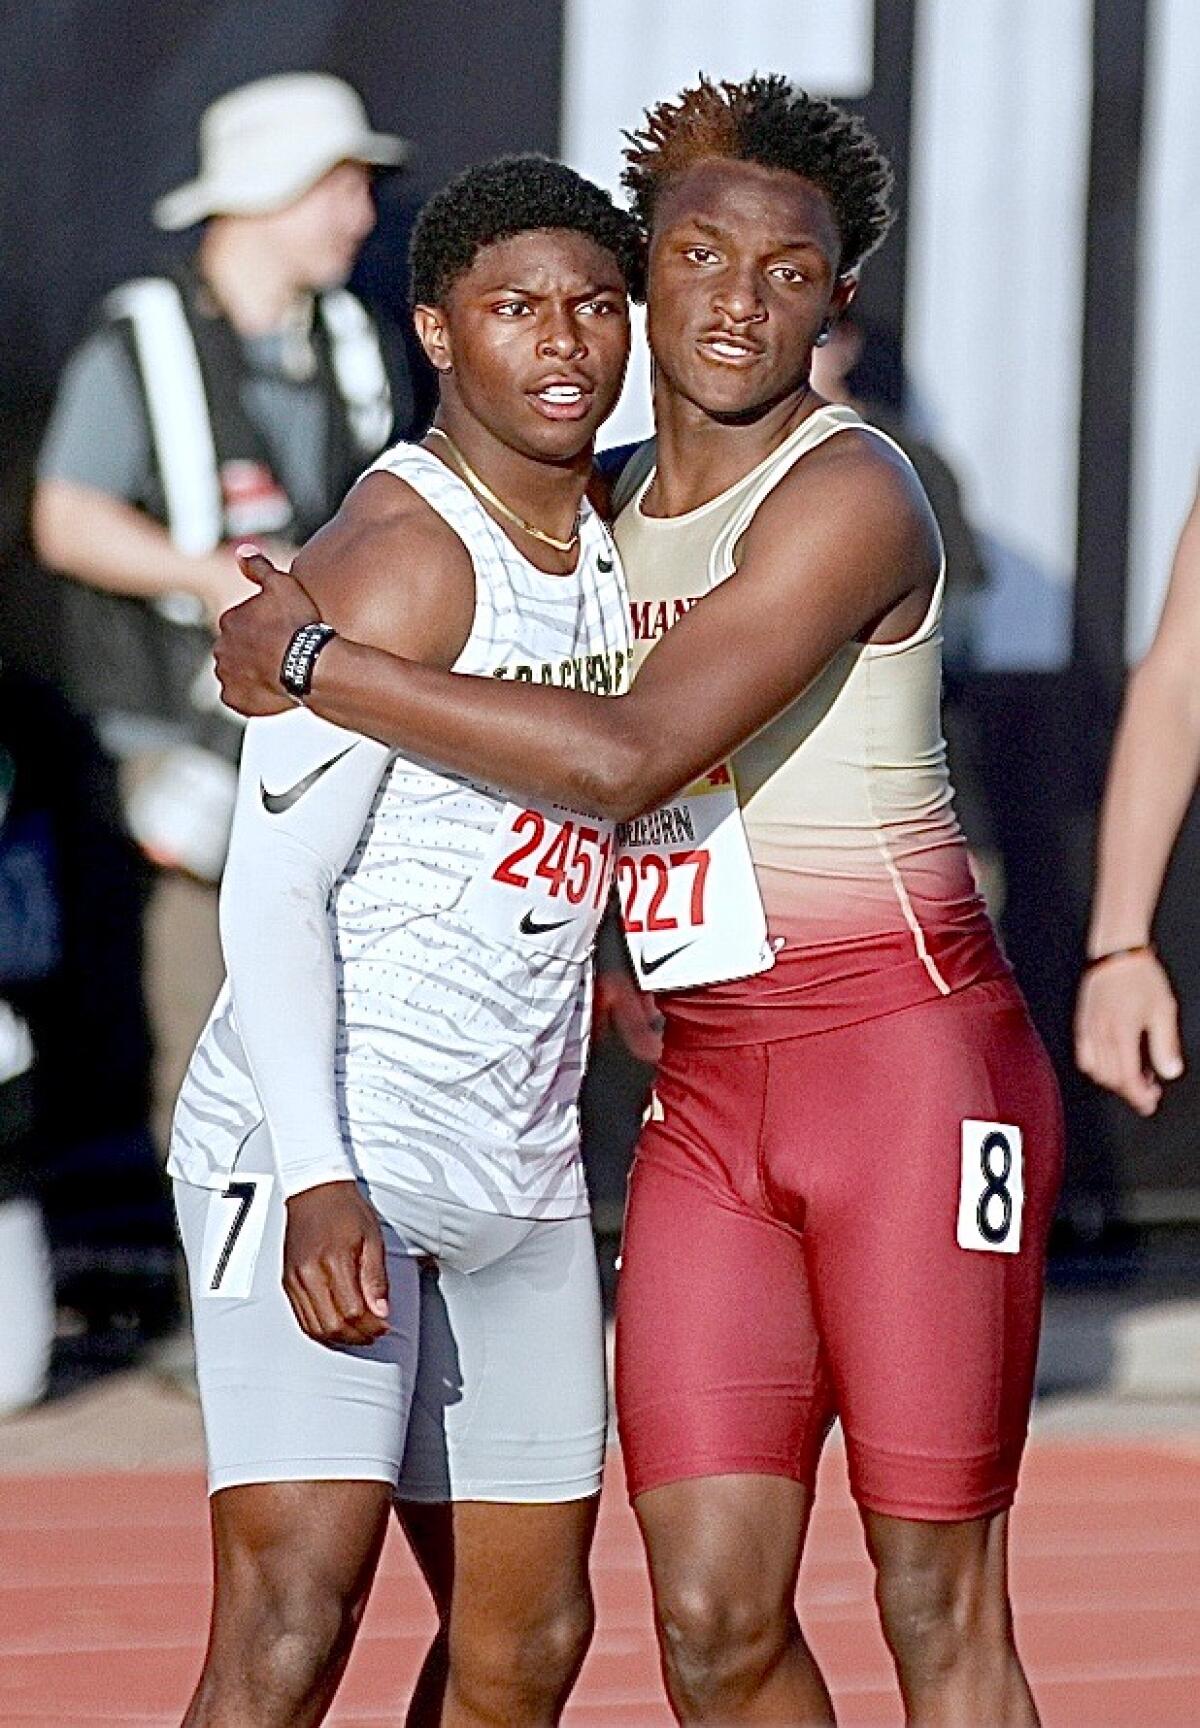 Class of 2027 sprinters Benjamin Harris of Long Beach Poly (left) and Demare Dezeurn of Alemany  at Arcadia Invitational.